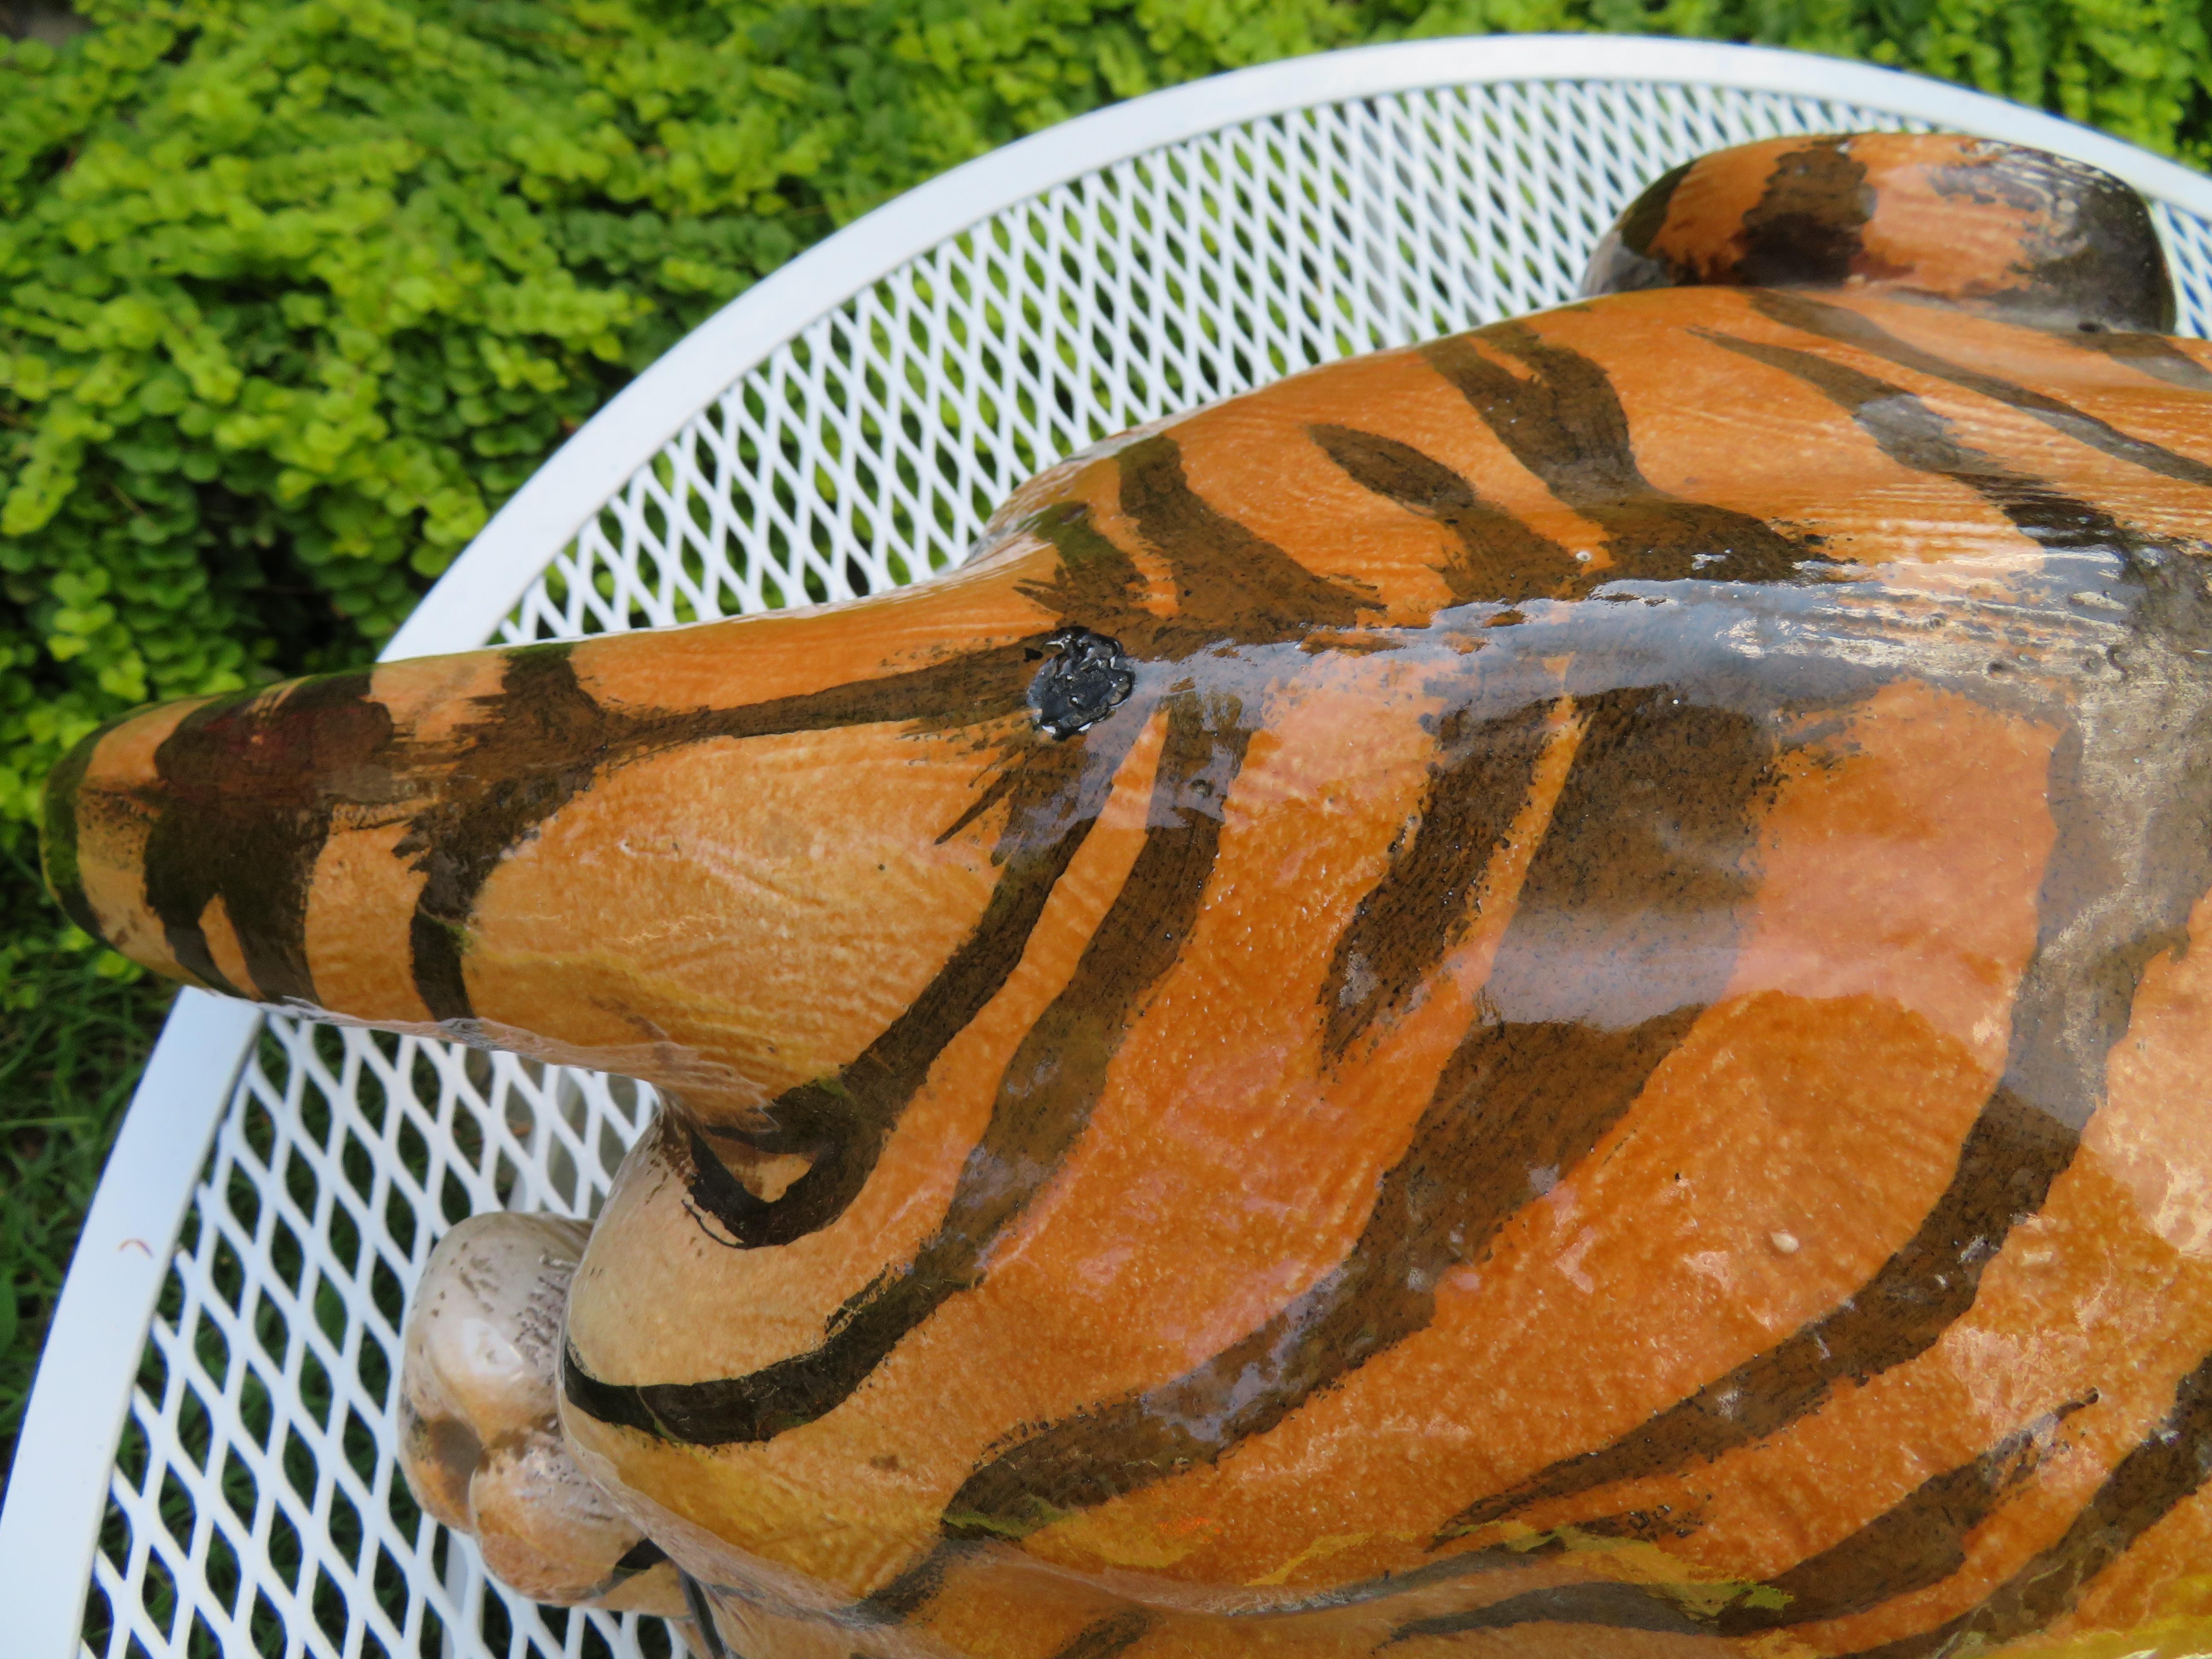 Vintage Large Italian Ceramic Crouching Tiger Statue Miid-Century Modern In Good Condition For Sale In Pemberton, NJ